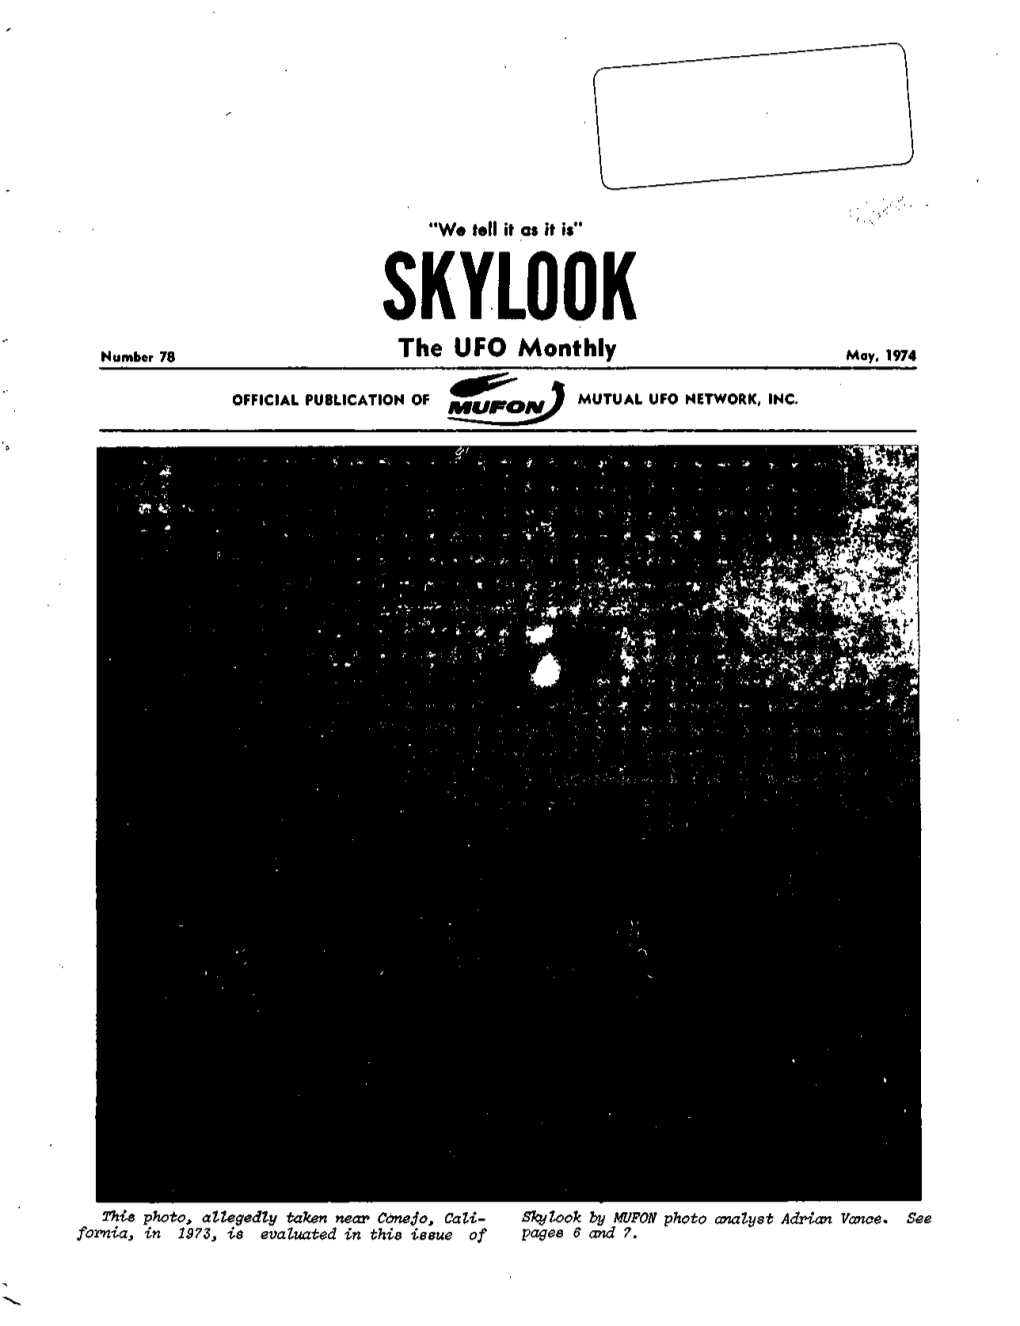 SKYLOOK Number 78 the UFO Monthly May, 1974